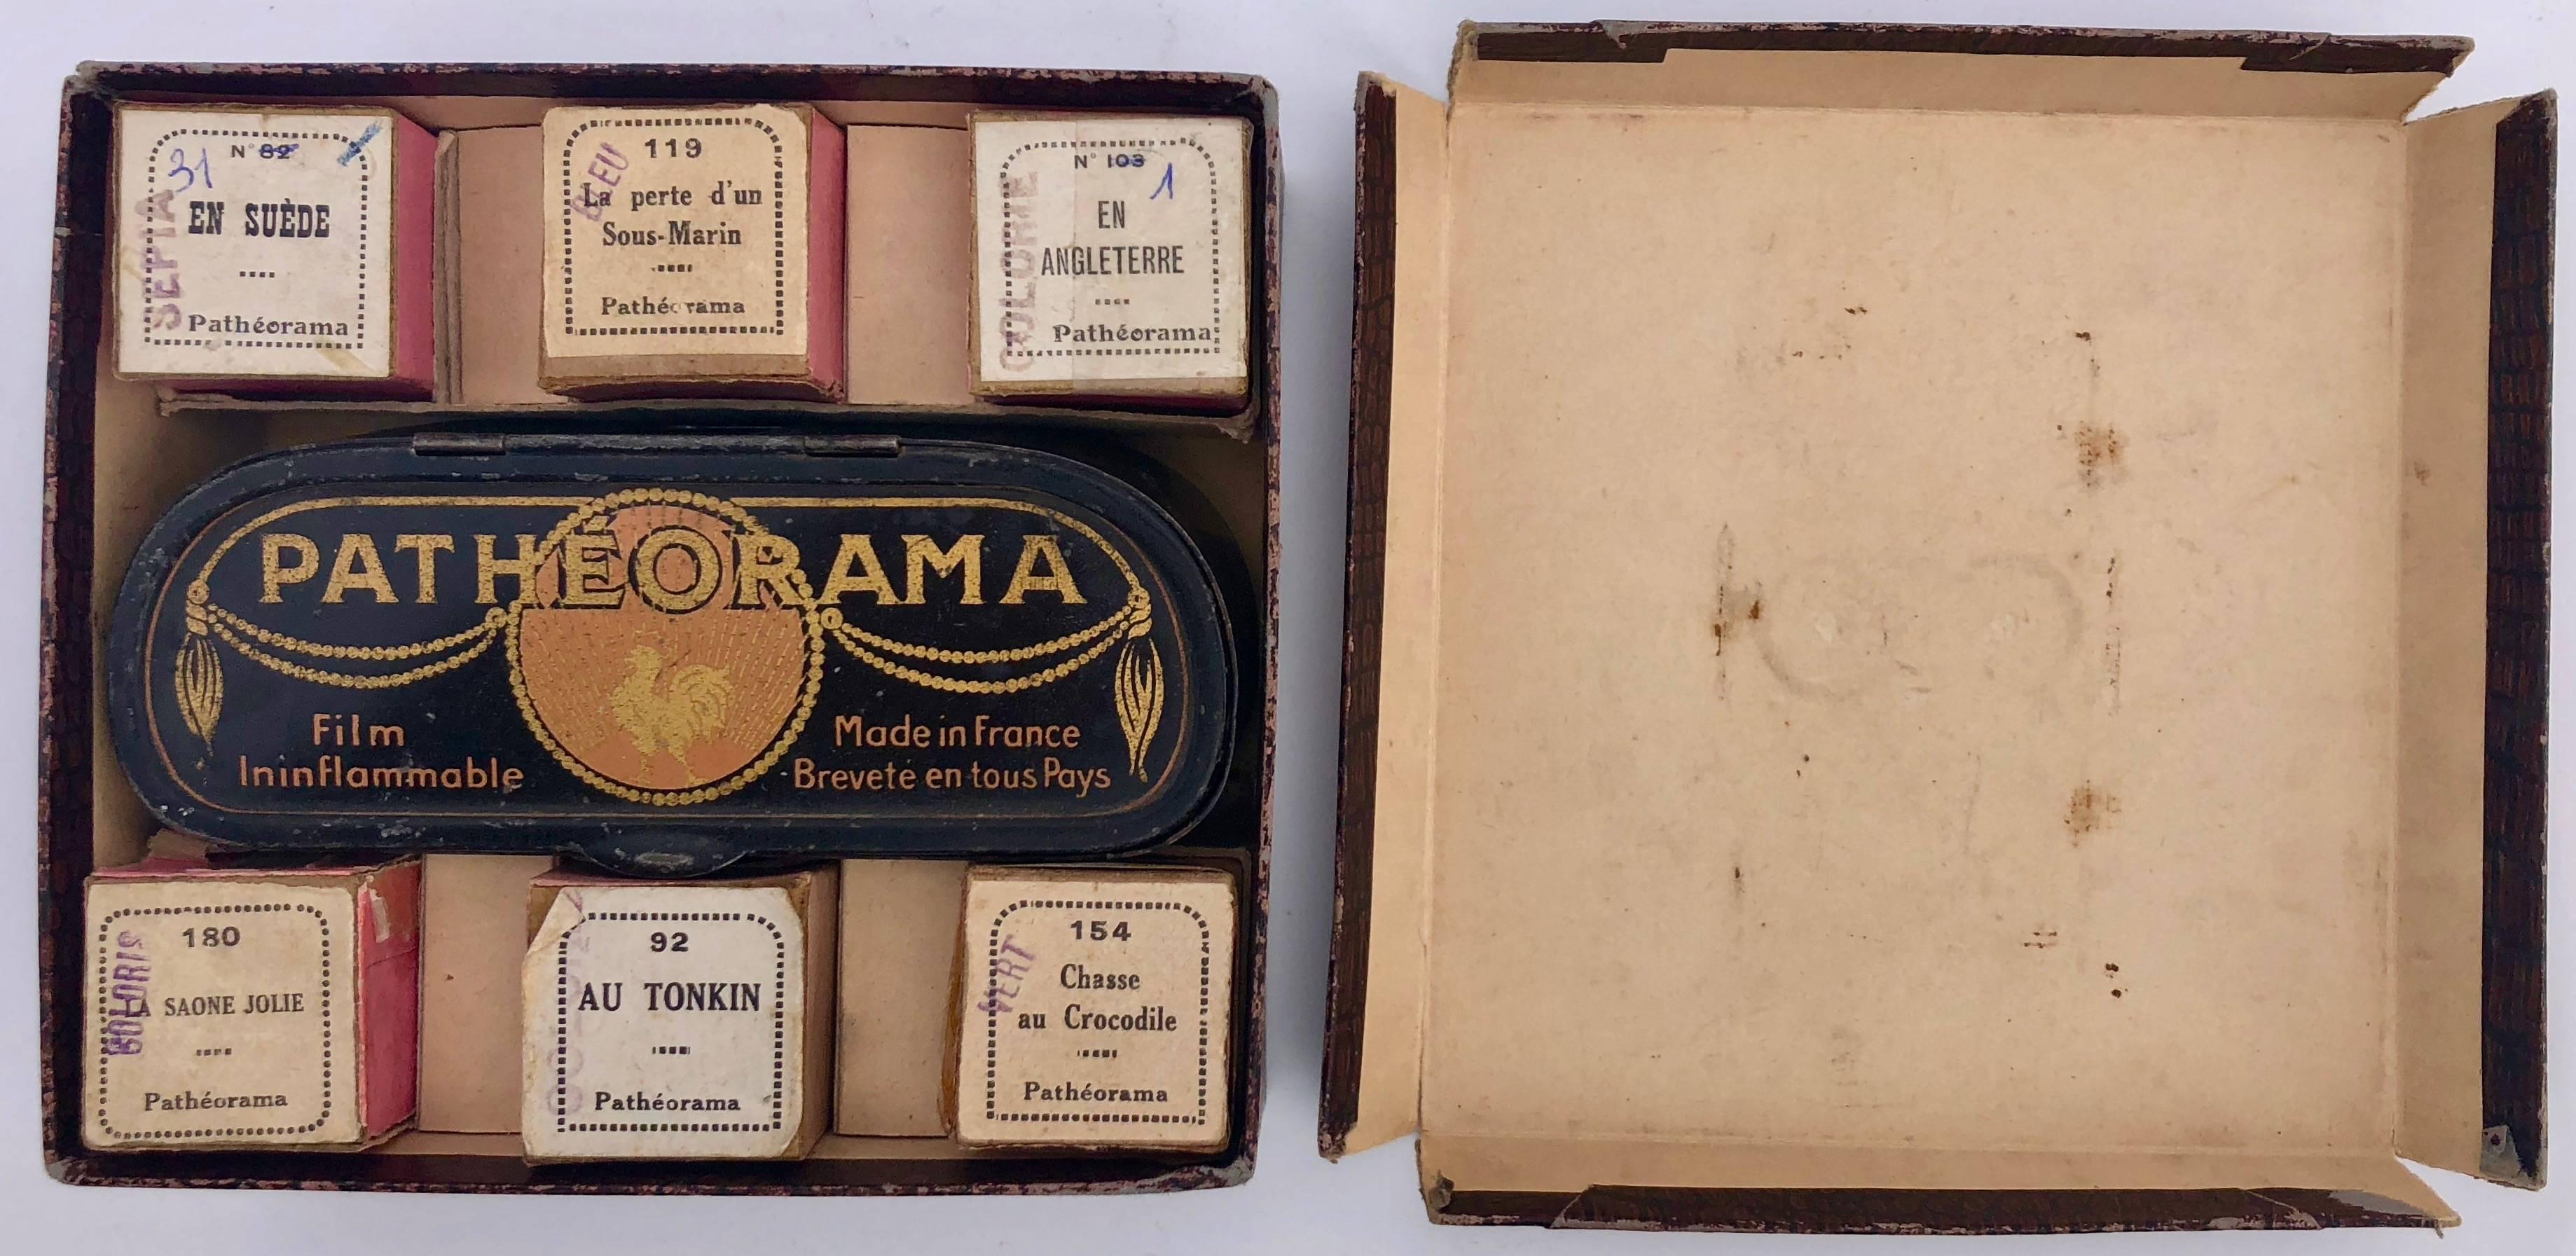 This Patheorama viewer was made by the French well-known cinema manufacturer PATHE in the 1920s. The viewer comes with 6 films and is in its original box (photo number 2) and has 3 original promotional brochures with it. 
There are two separate